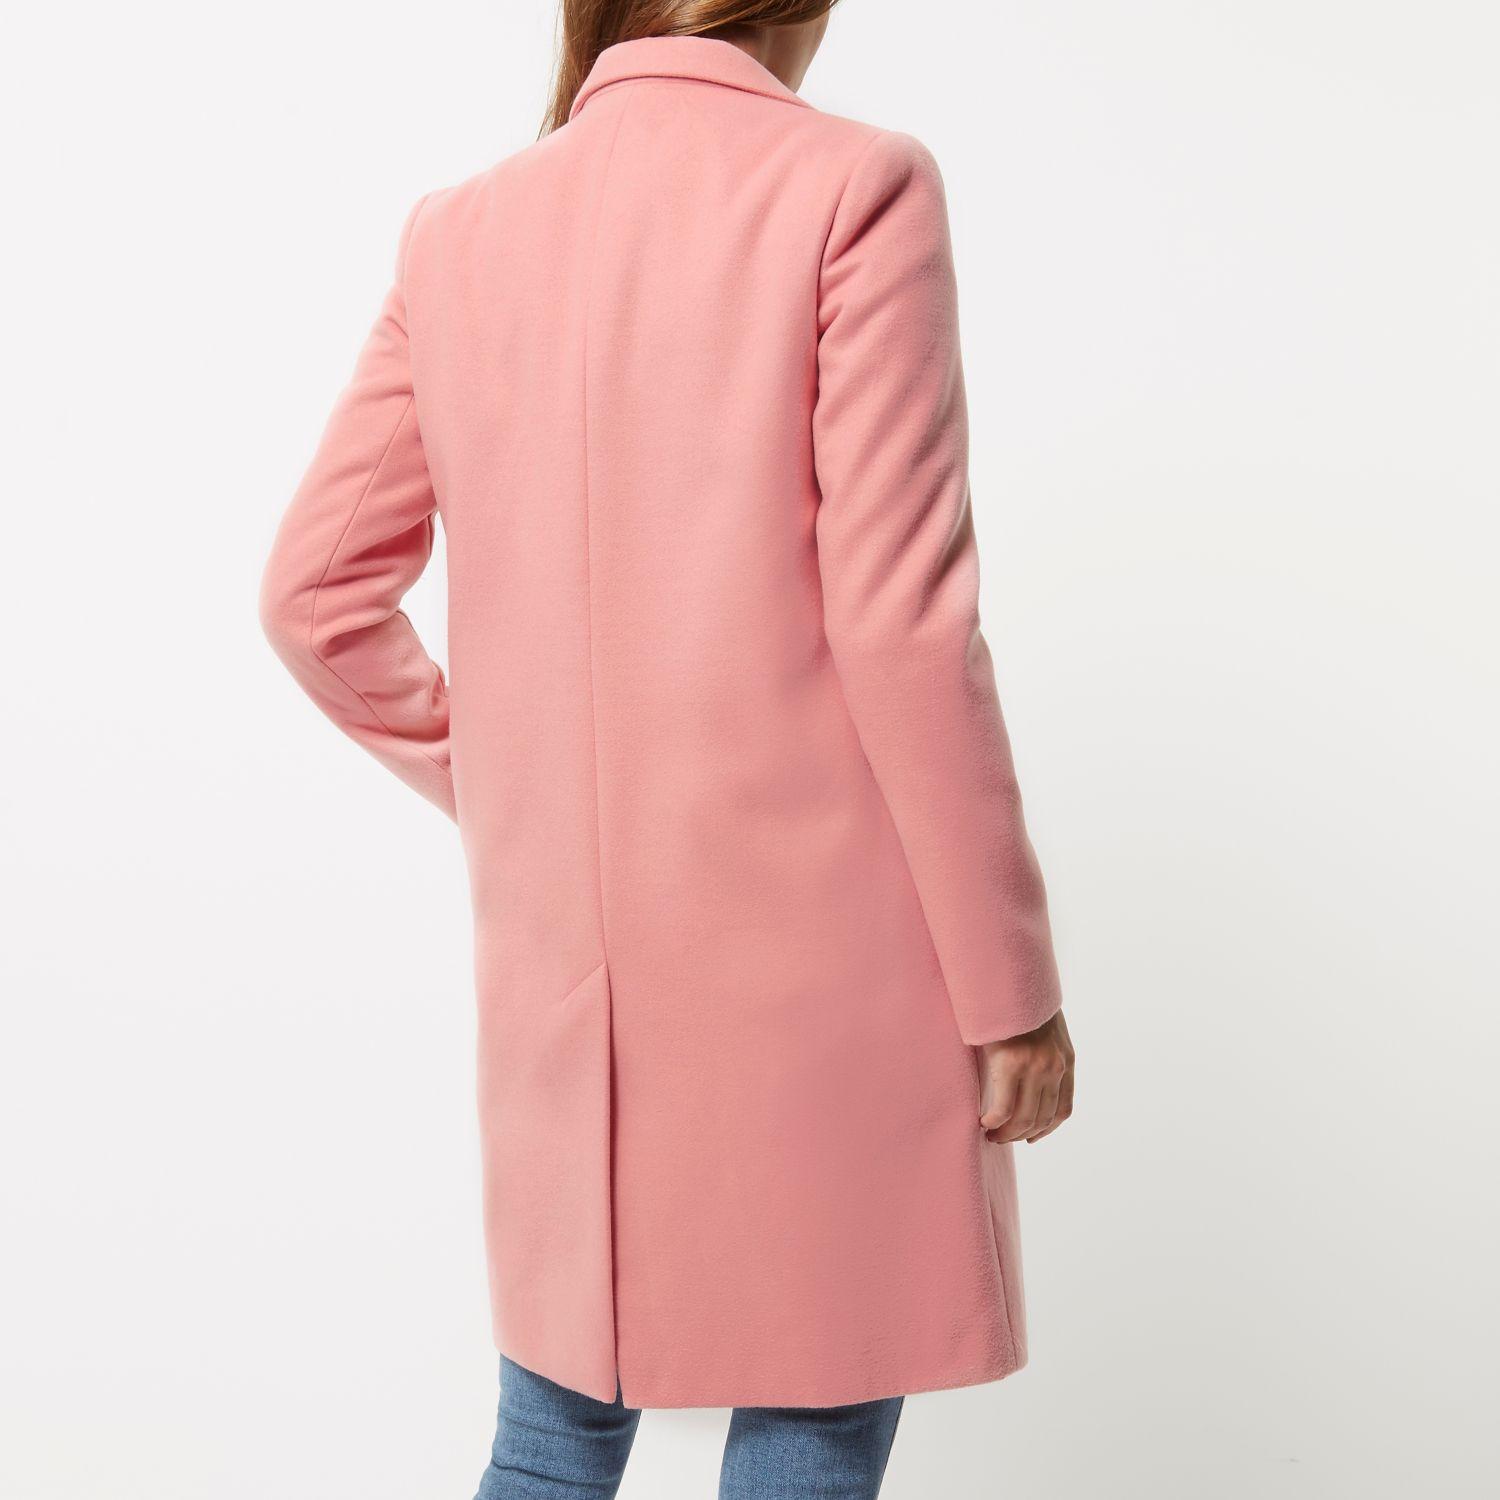 Lyst - River Island Pink Tailored Overcoat in Pink